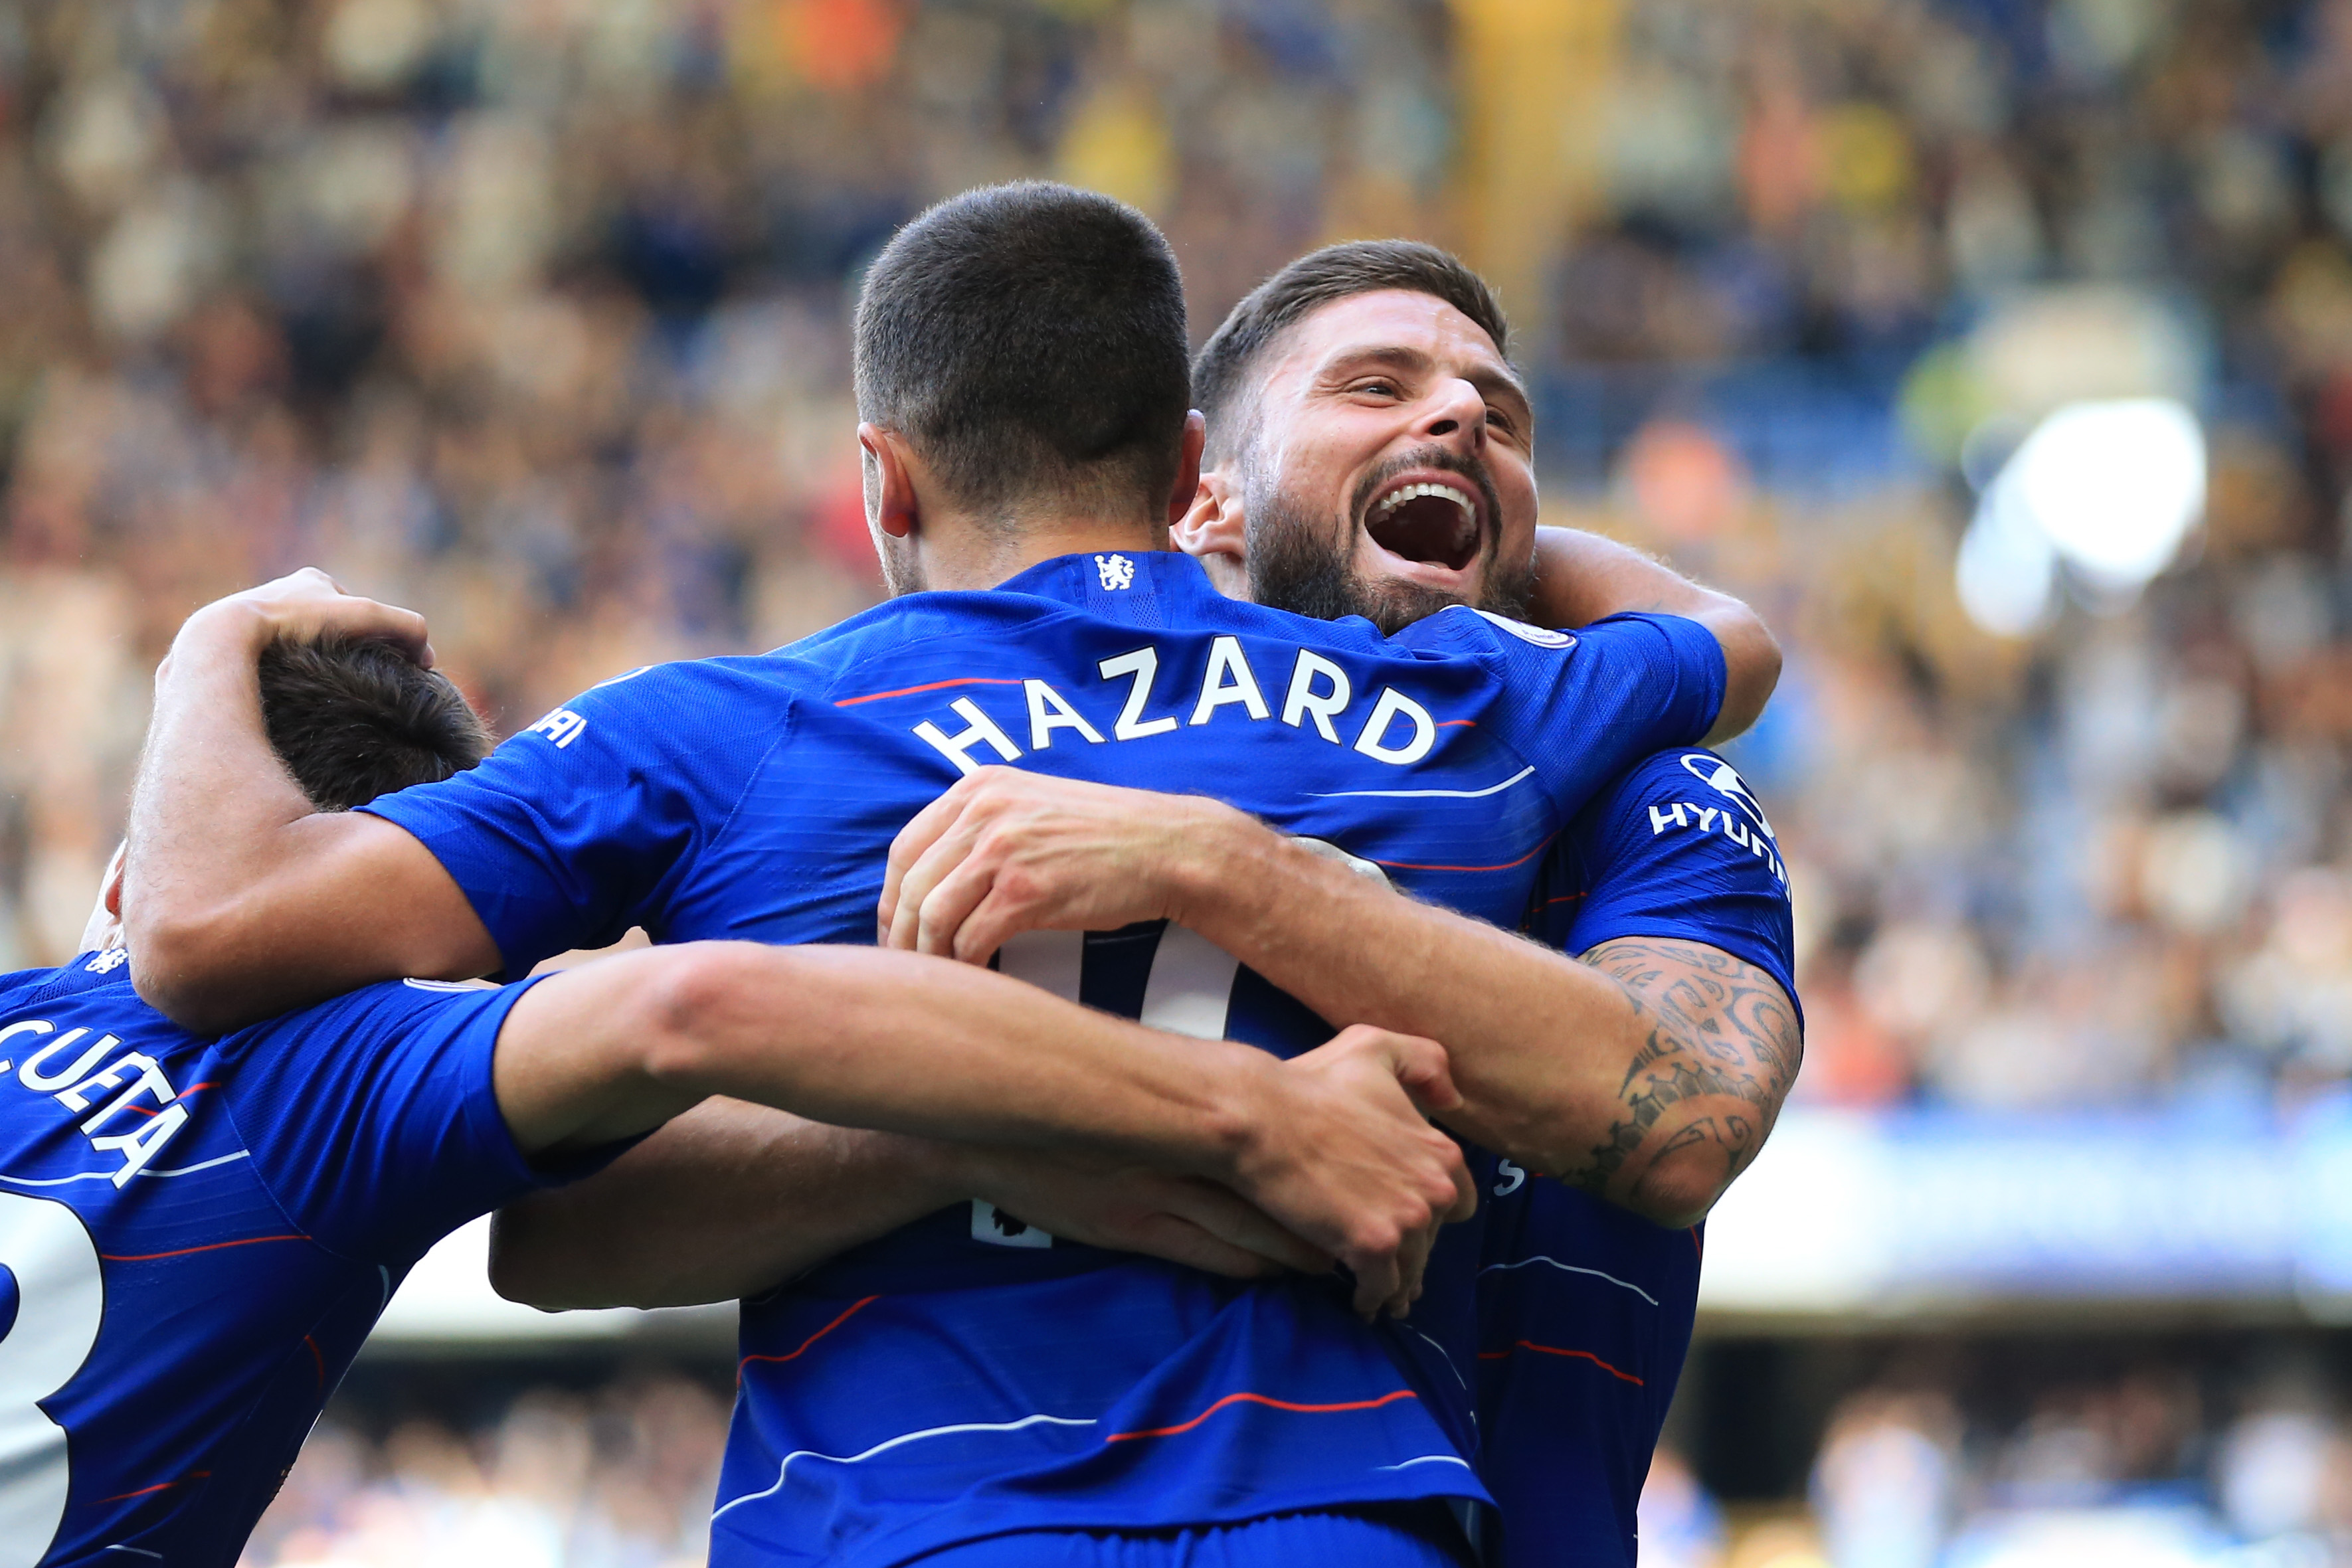 LONDON, ENGLAND - SEPTEMBER 15:  Eden Hazard of Chelsea celebrates with teammate Olivier Giroud after scoring his team's first goal during the Premier League match between Chelsea FC and Cardiff City at Stamford Bridge on September 15, 2018 in London, United Kingdom.  (Photo by Marc Atkins/Getty Images)